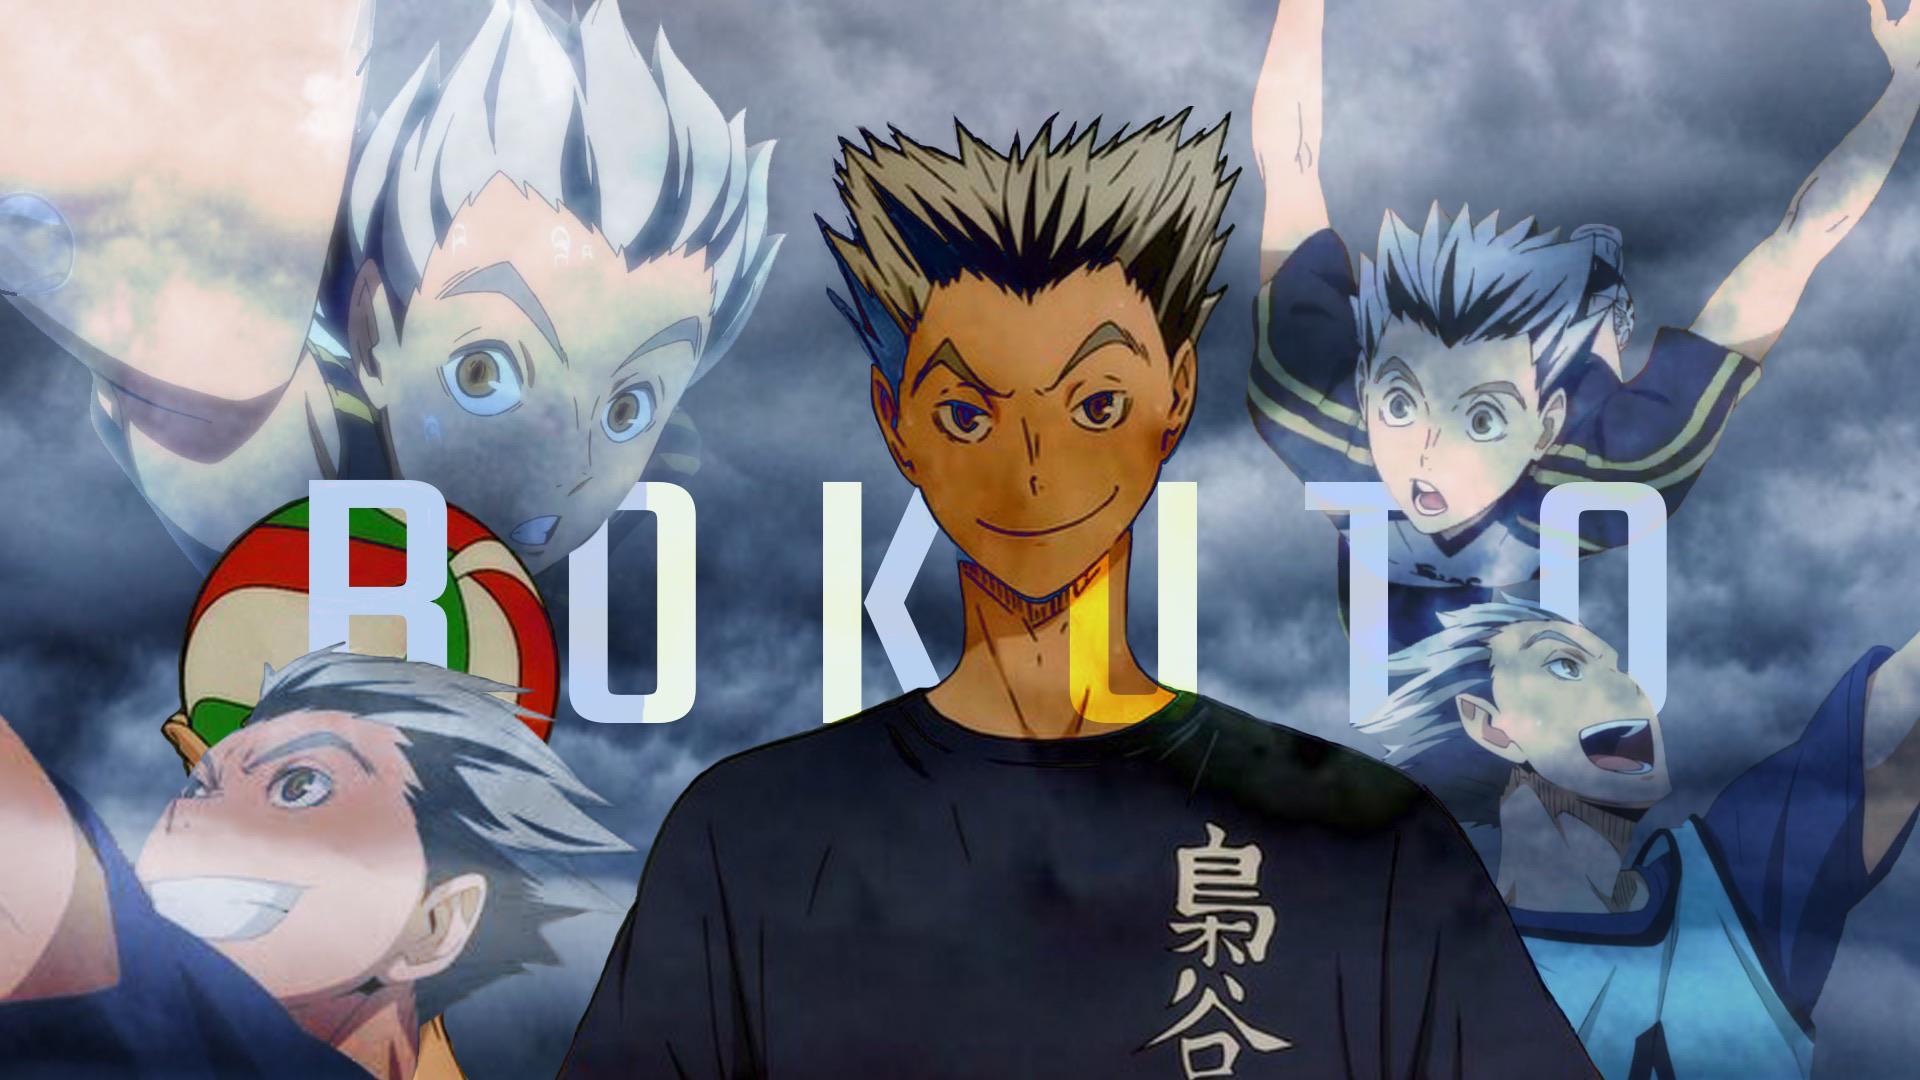 Saw no Bokuto background, so I decided to make one! let me know